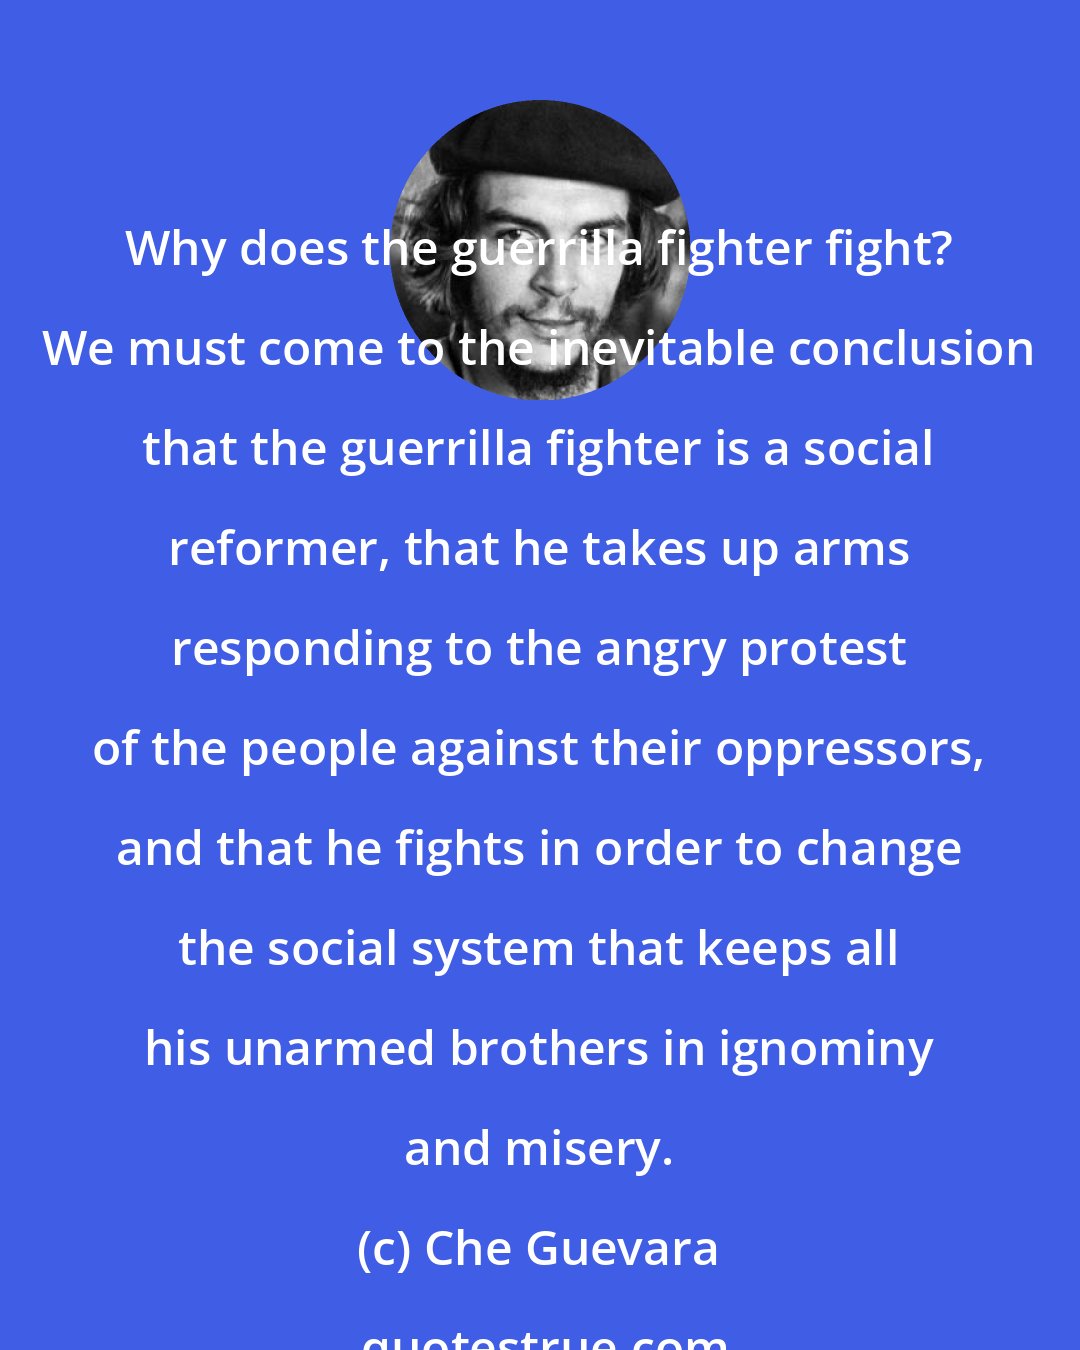 Che Guevara: Why does the guerrilla fighter fight? We must come to the inevitable conclusion that the guerrilla fighter is a social reformer, that he takes up arms responding to the angry protest of the people against their oppressors, and that he fights in order to change the social system that keeps all his unarmed brothers in ignominy and misery.